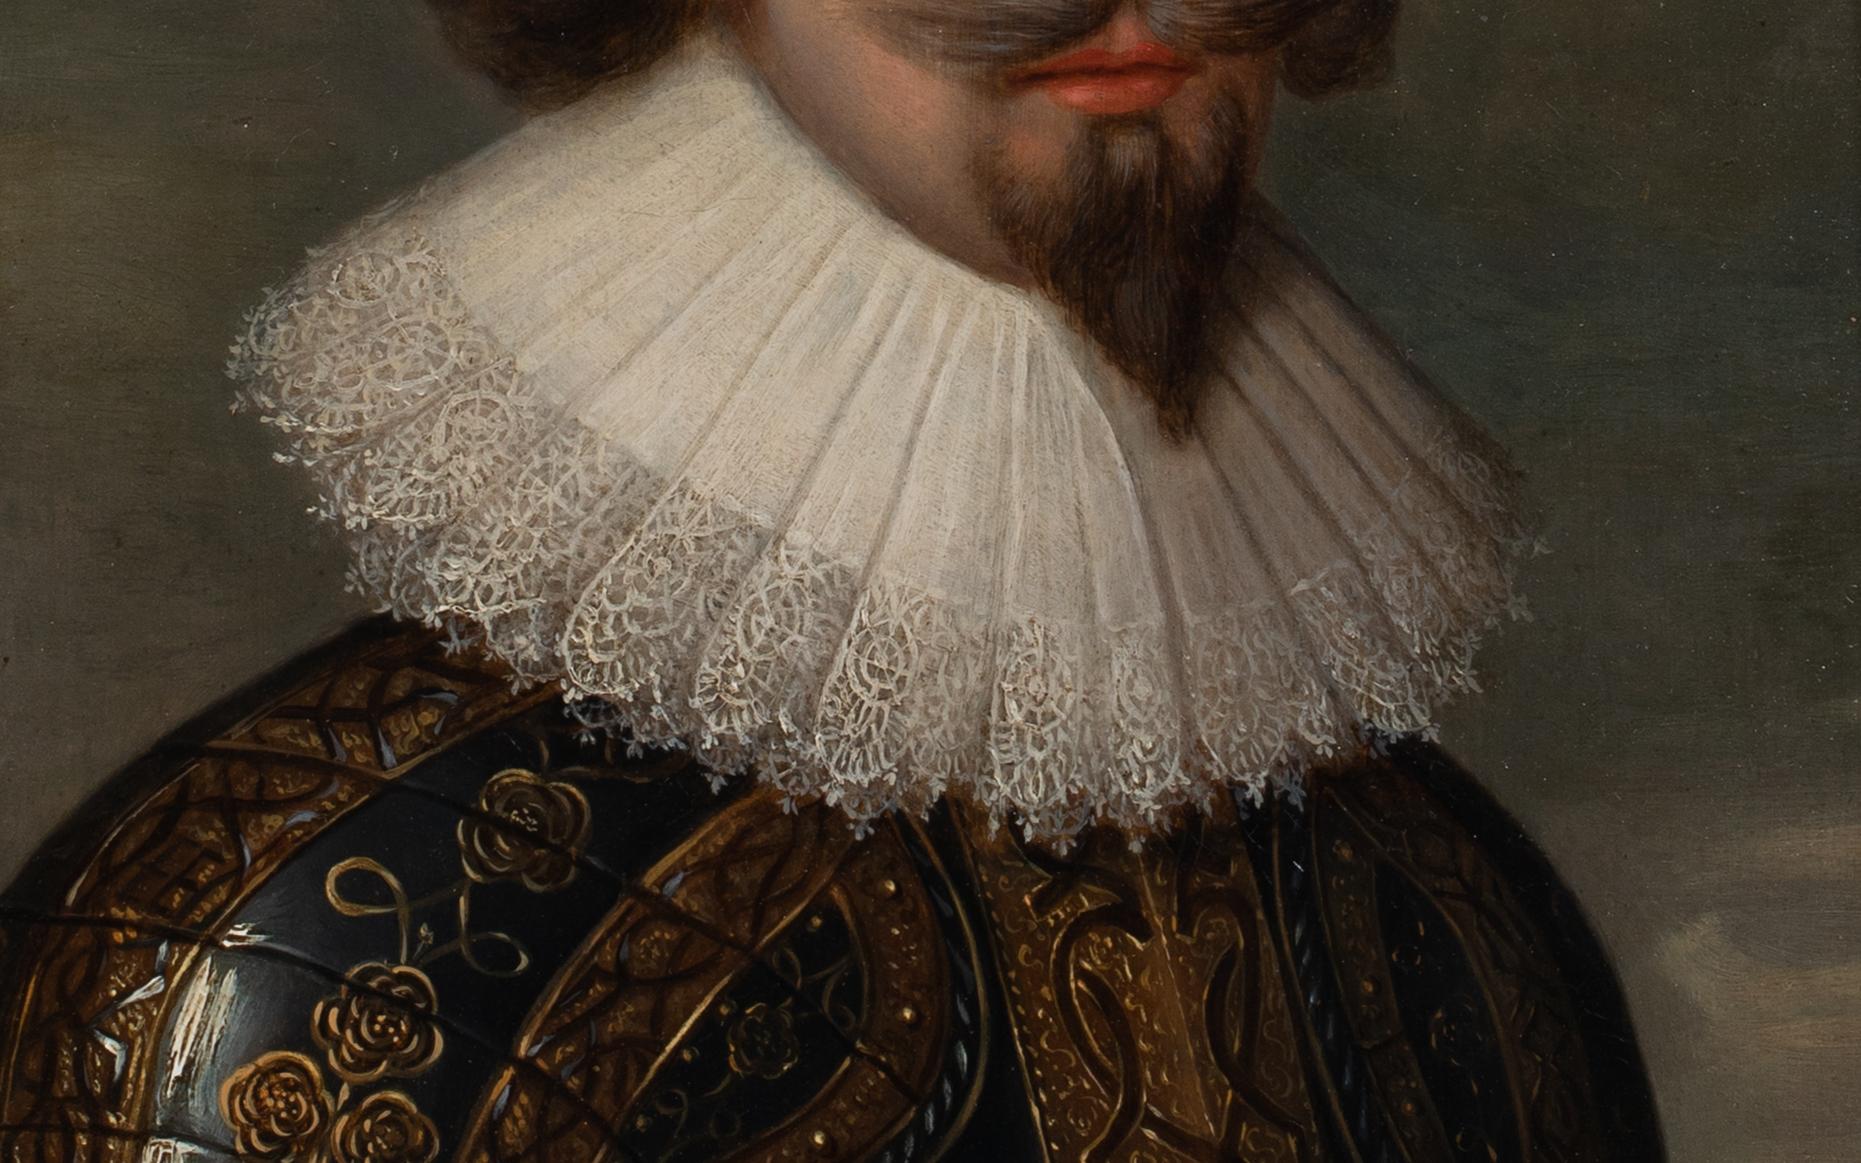 Portrait King Charles I Of England, 17th Century

Studio of Daniel MYTENS (1590-1648)

17th Century Old Master portrait of King Charles I of England, oil on panel. Excellent quality and condition early important portrait of the king in armour and a